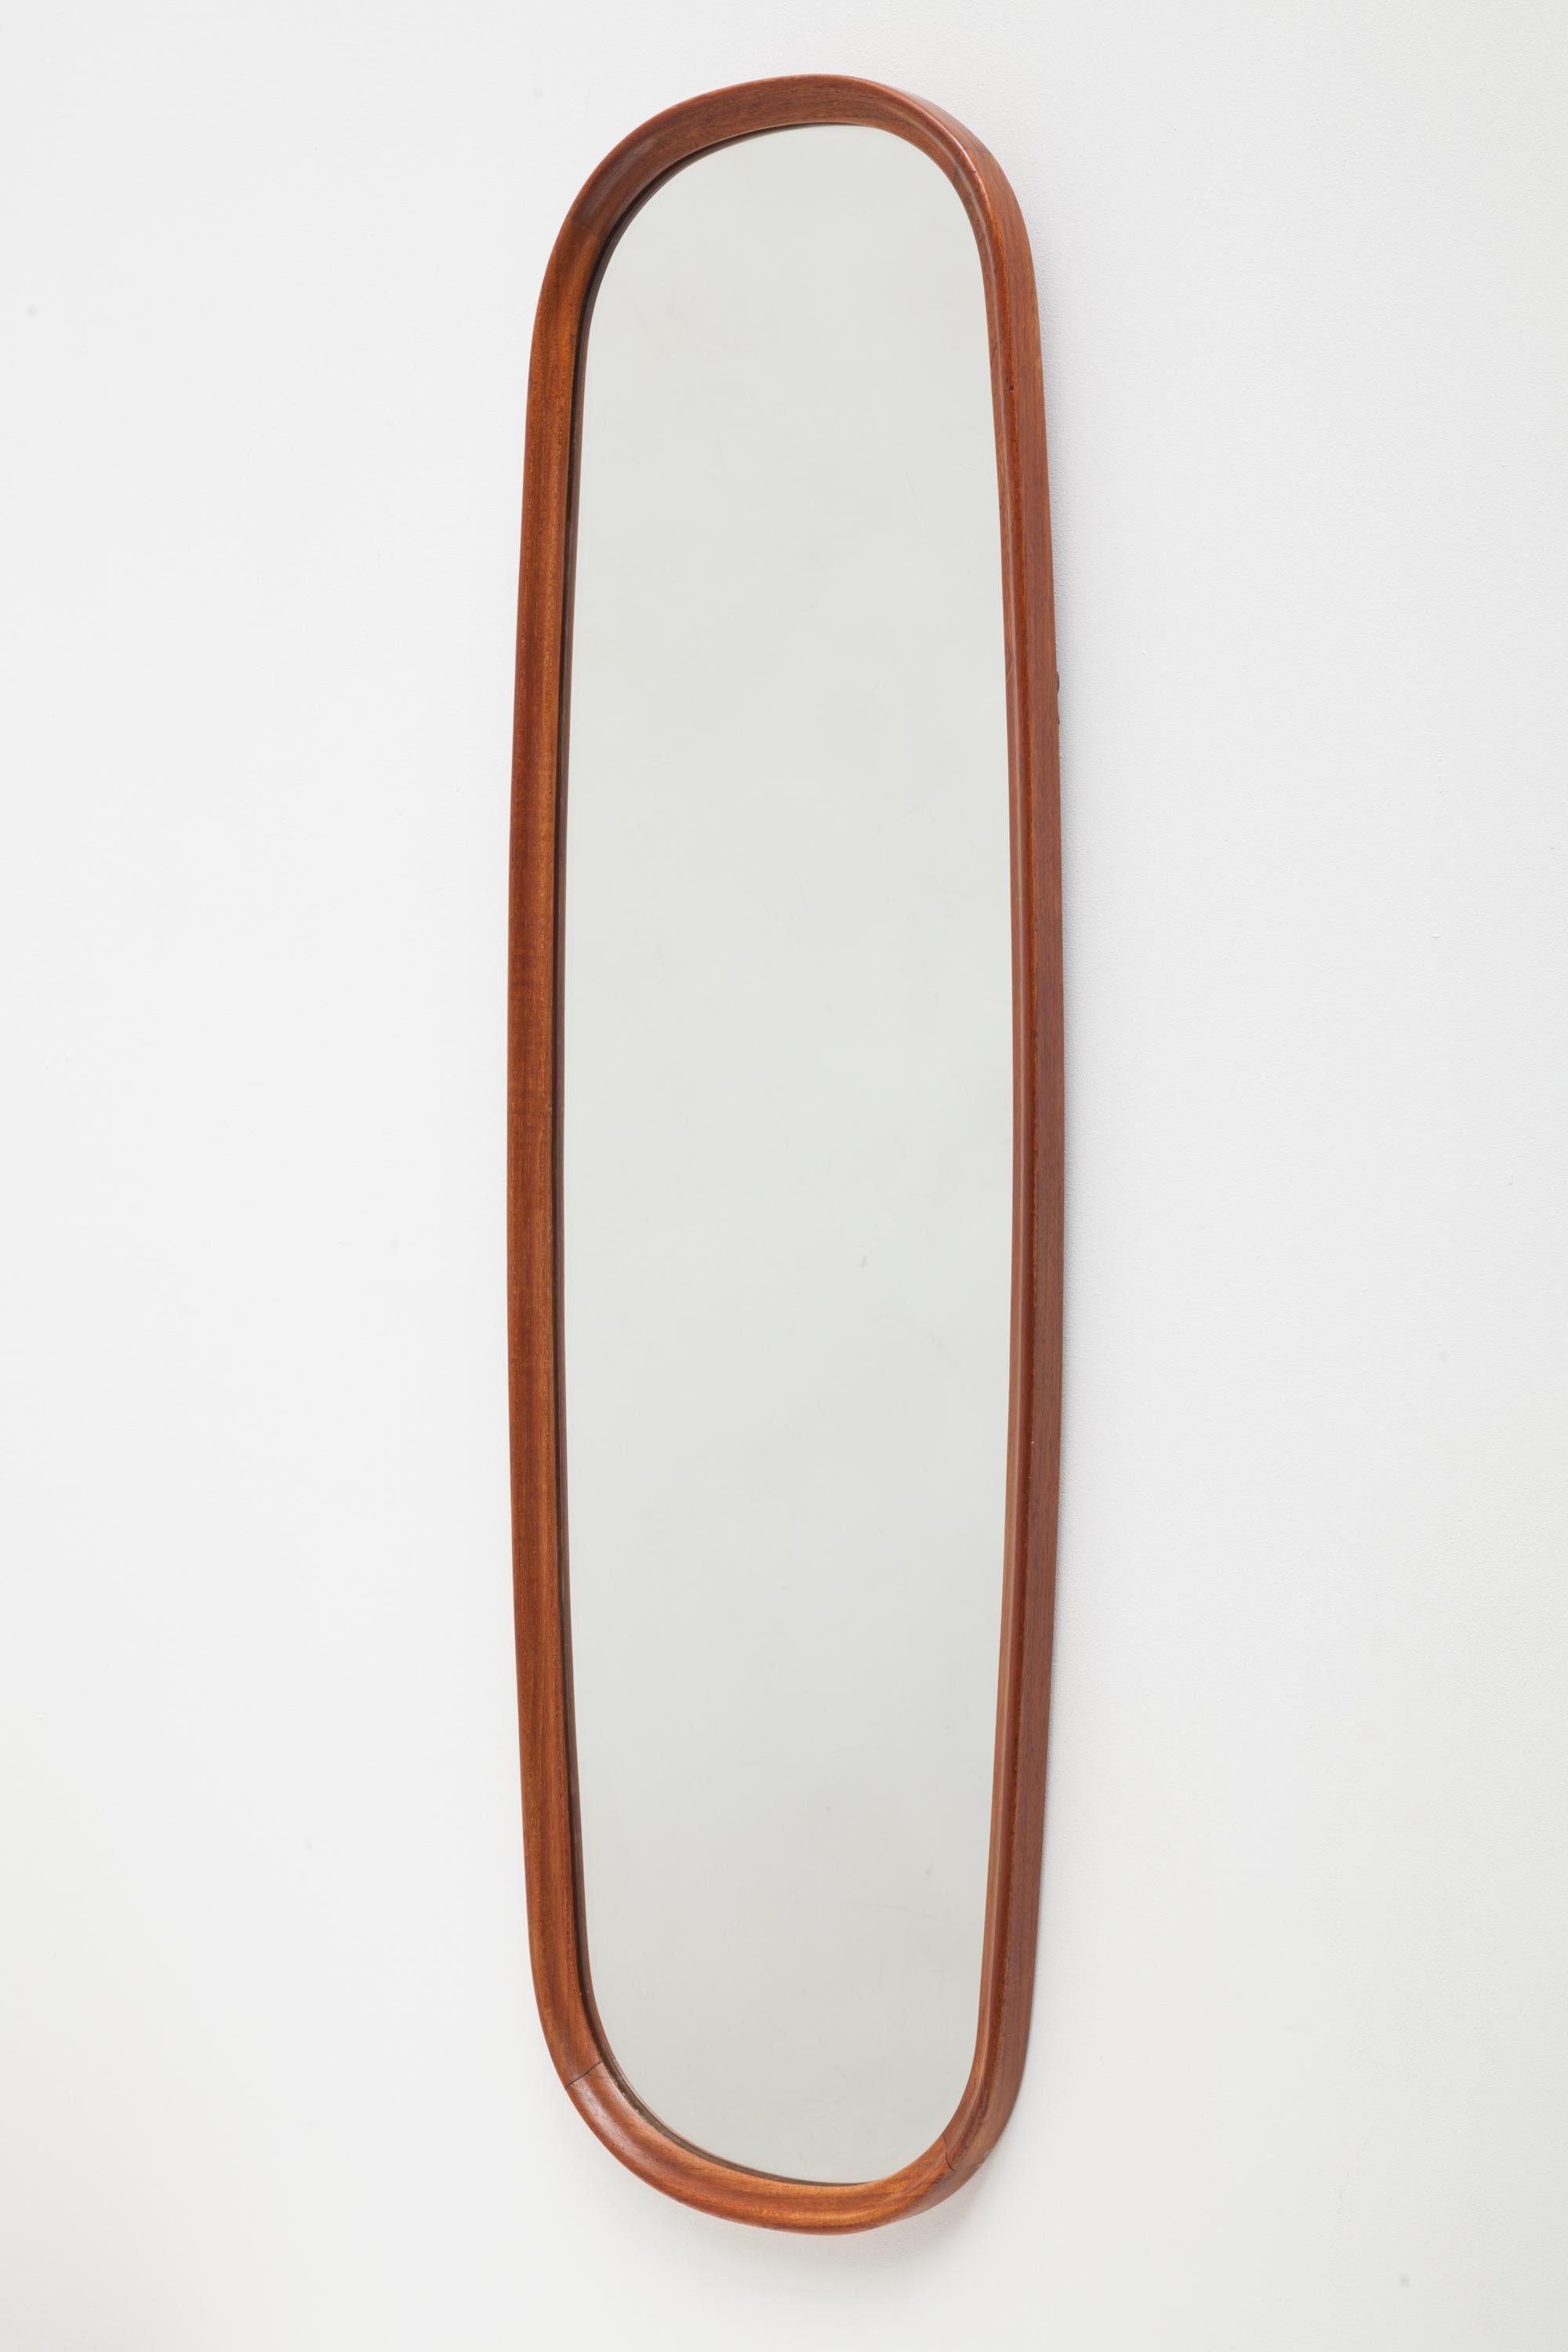 Vintage mid century teak wall mirror in an oval ellipse shape features brass hanging hardware. Real crystal glass.